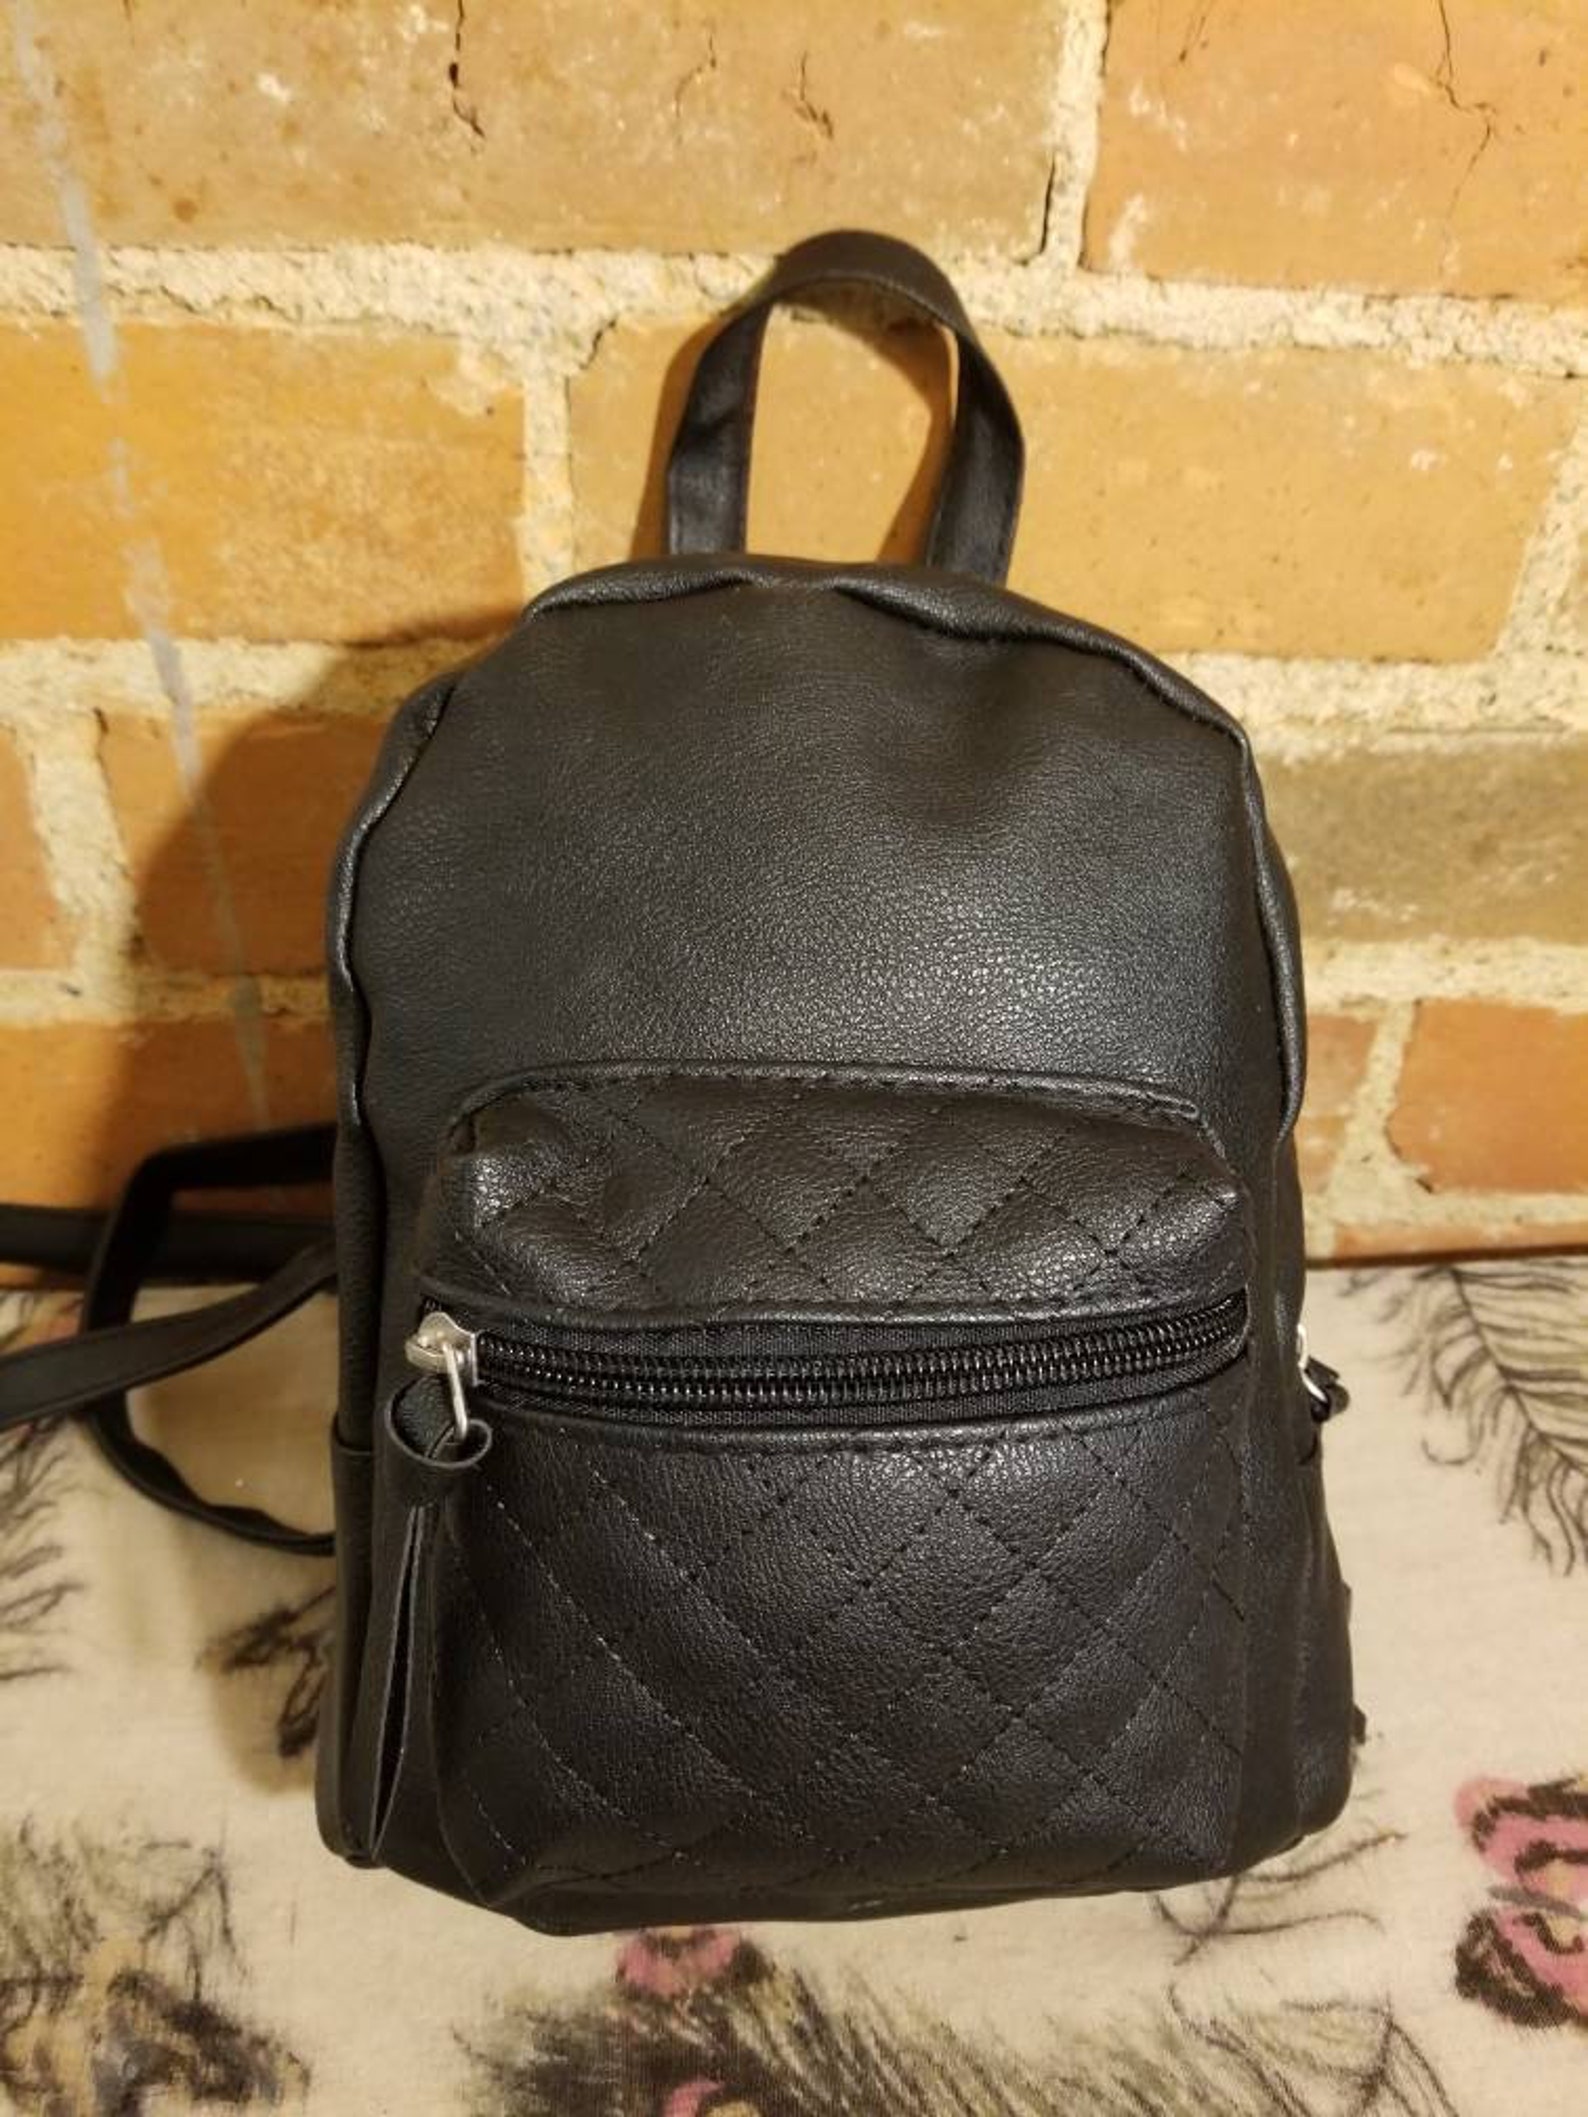 BLACK BABY BACKPACK / Vintage 90's Smart Trend Sporty Baby | Etsy